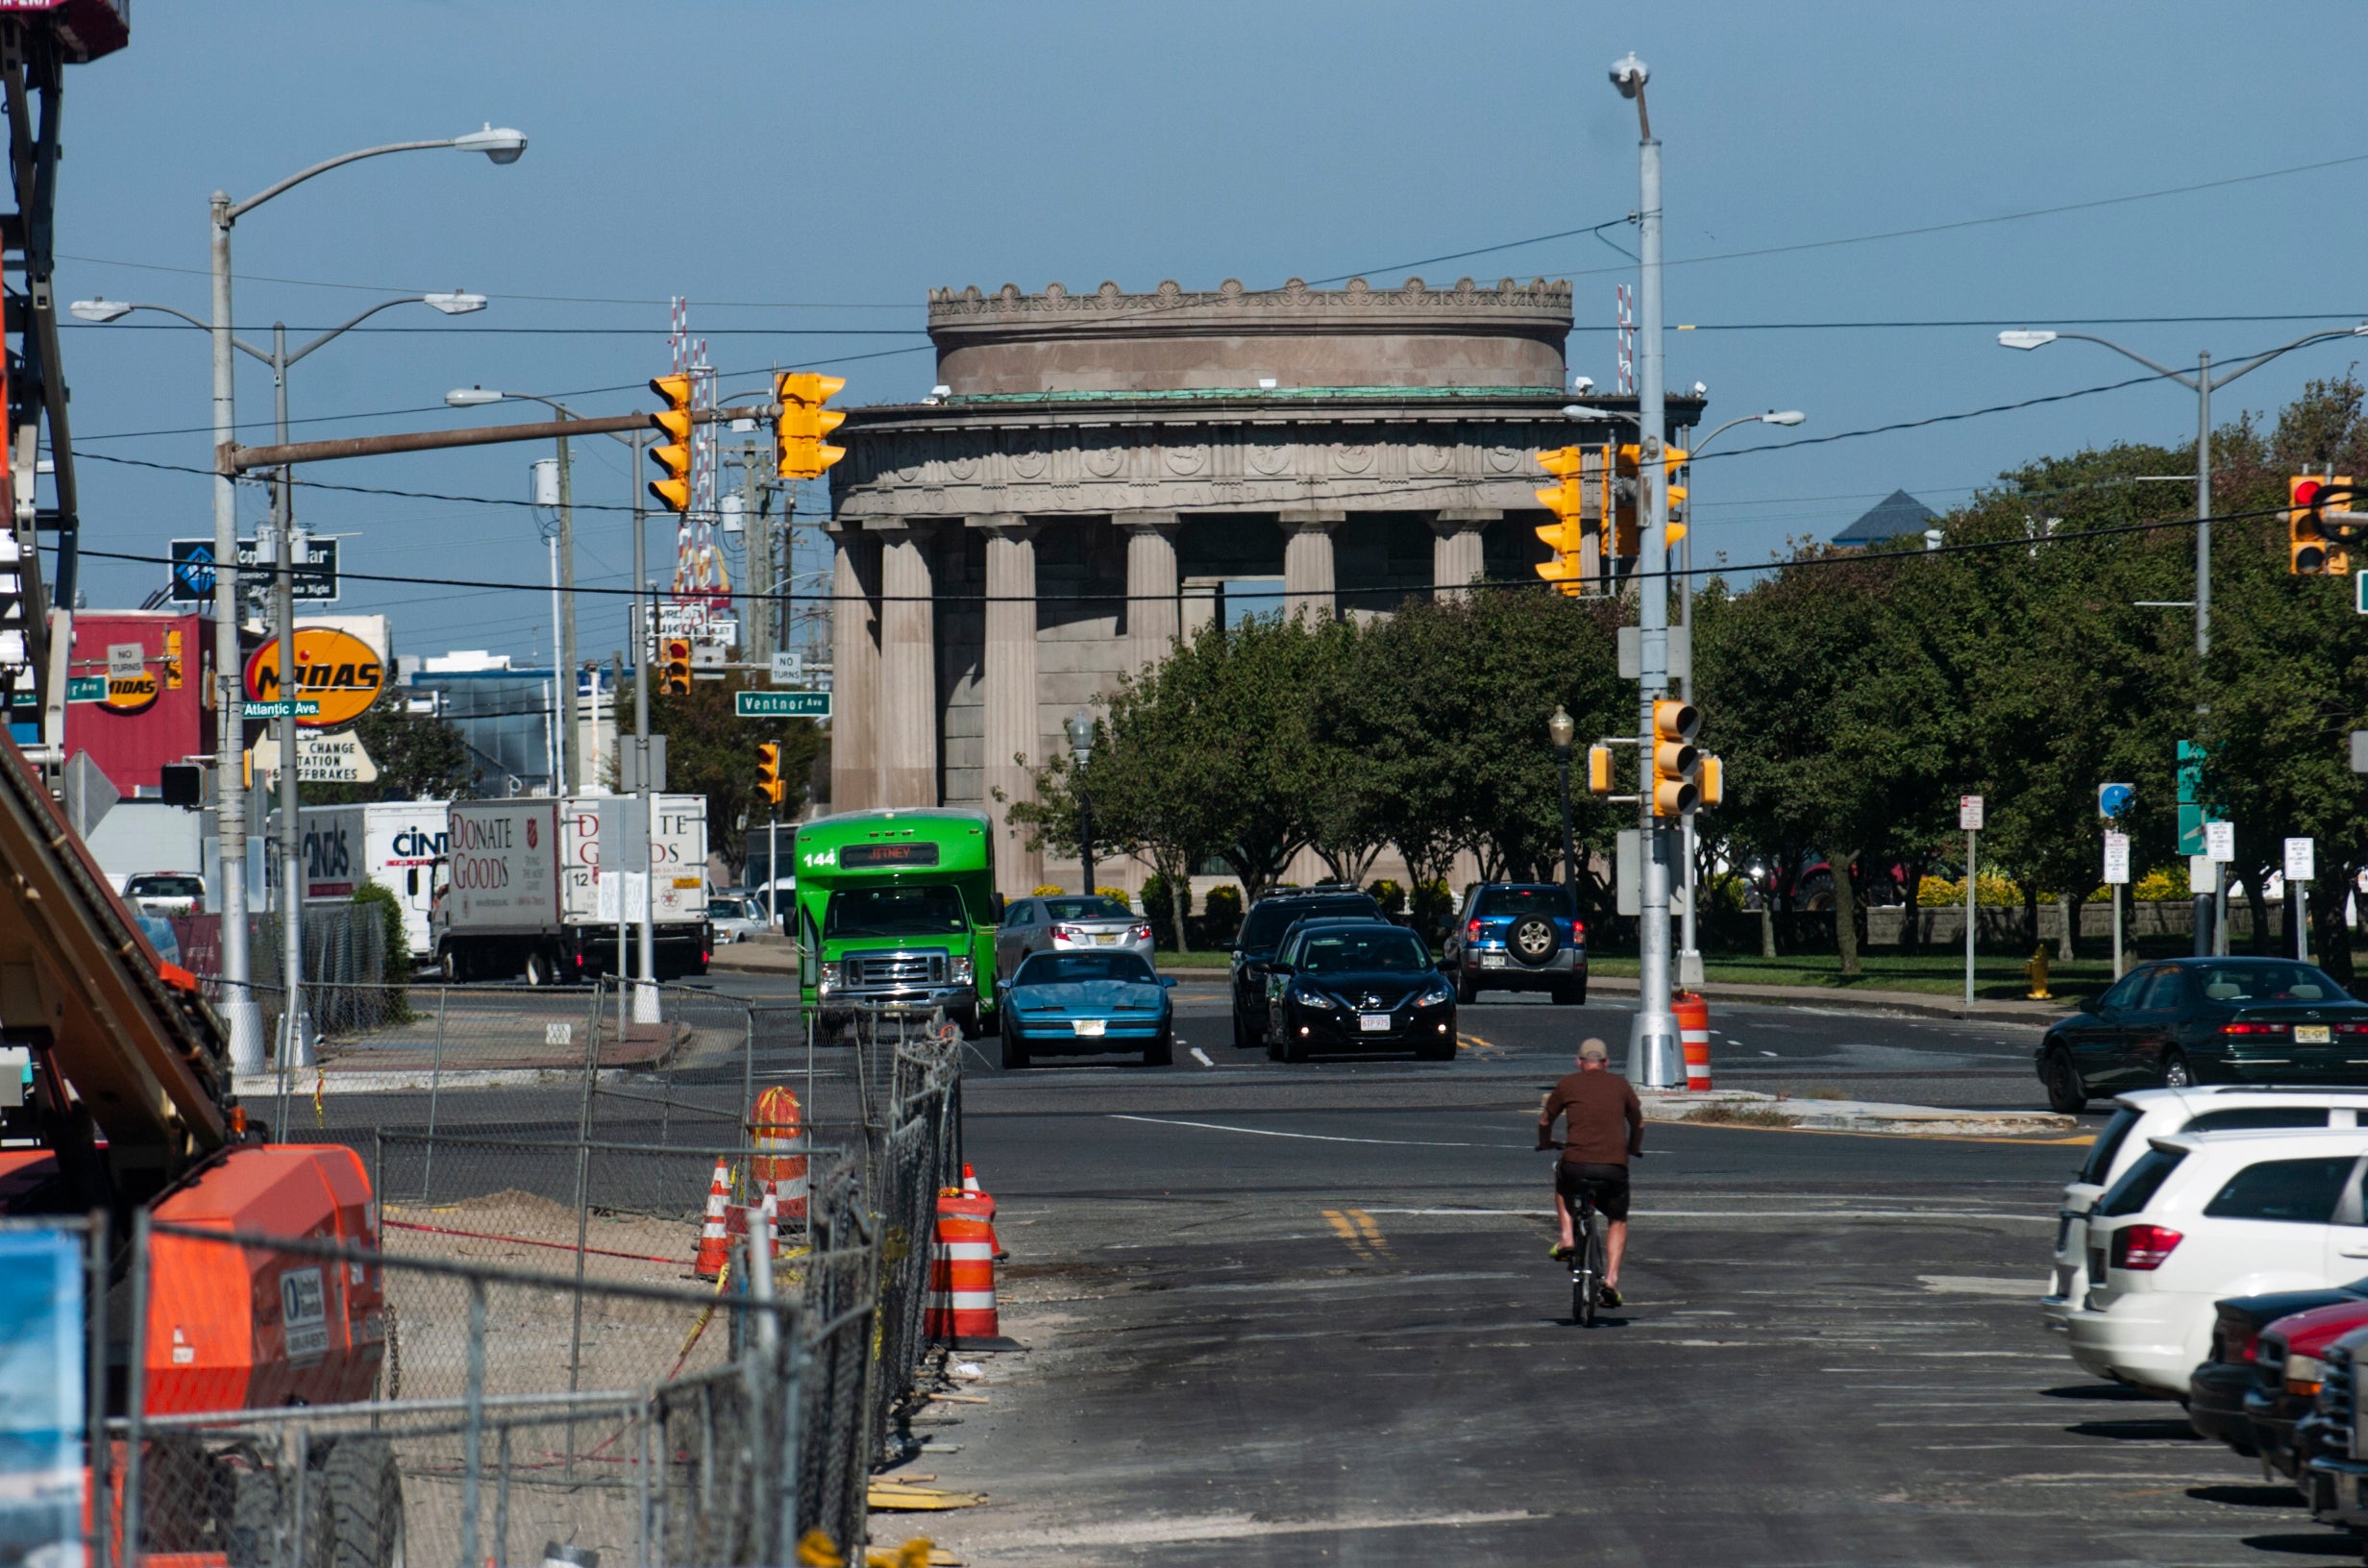 The World War I Monument on Albany Avenue is seen from the Atlantic City boardwalk.